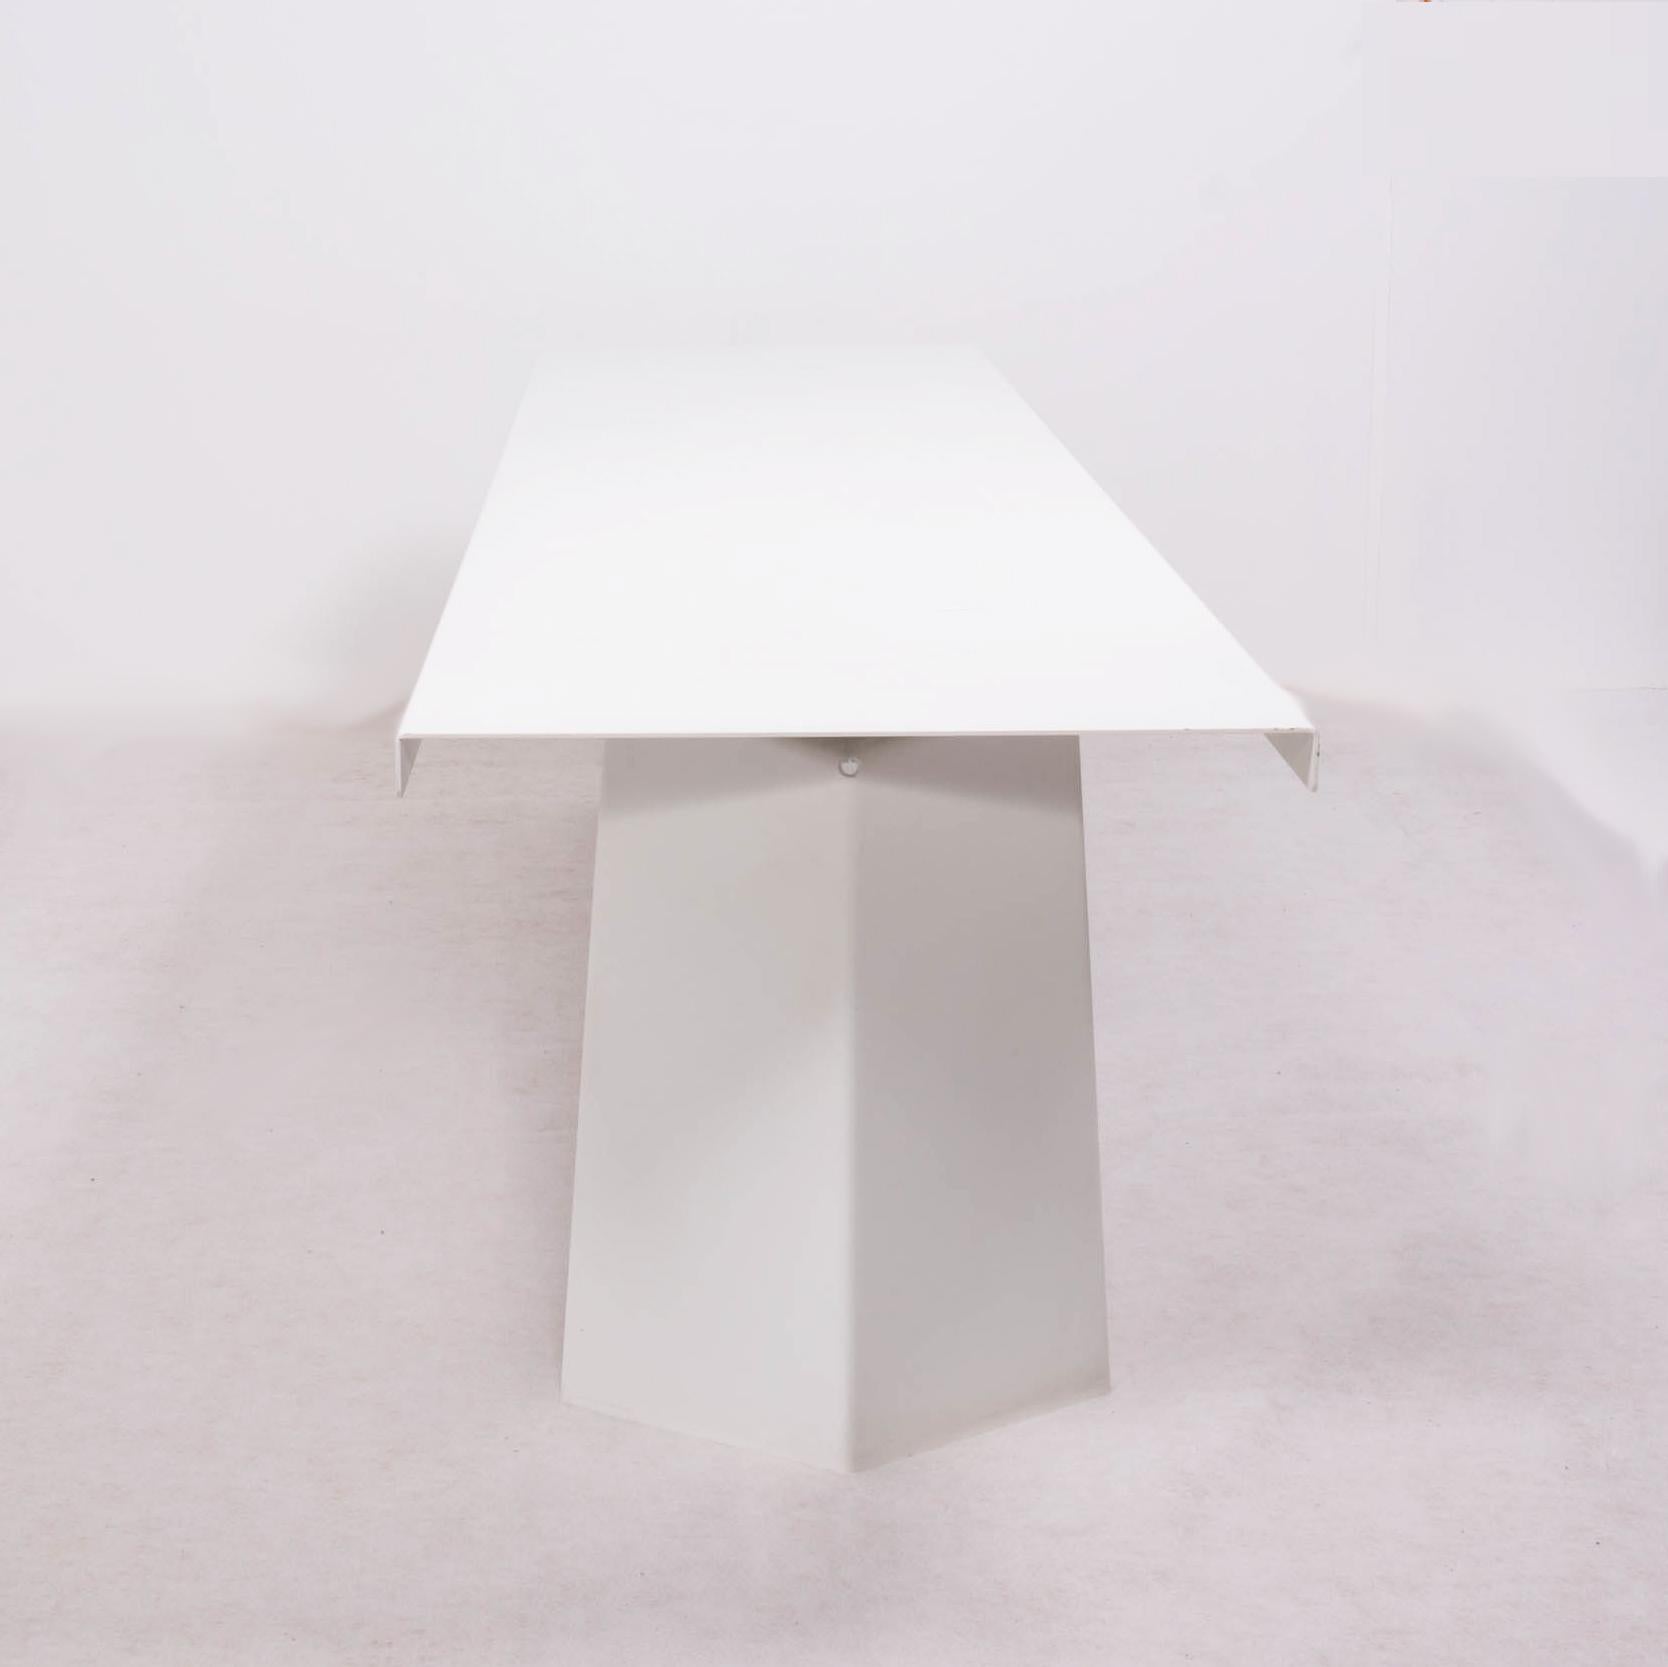 A Konstantin Grcic for ClassiCon design Classic. Finished in sheet steel with a fine-texture white powder coating, the modern Industrial Pallas dining table sits atop two wide angled legs, creating a bold silhouette. The bright, modern aesthetic is